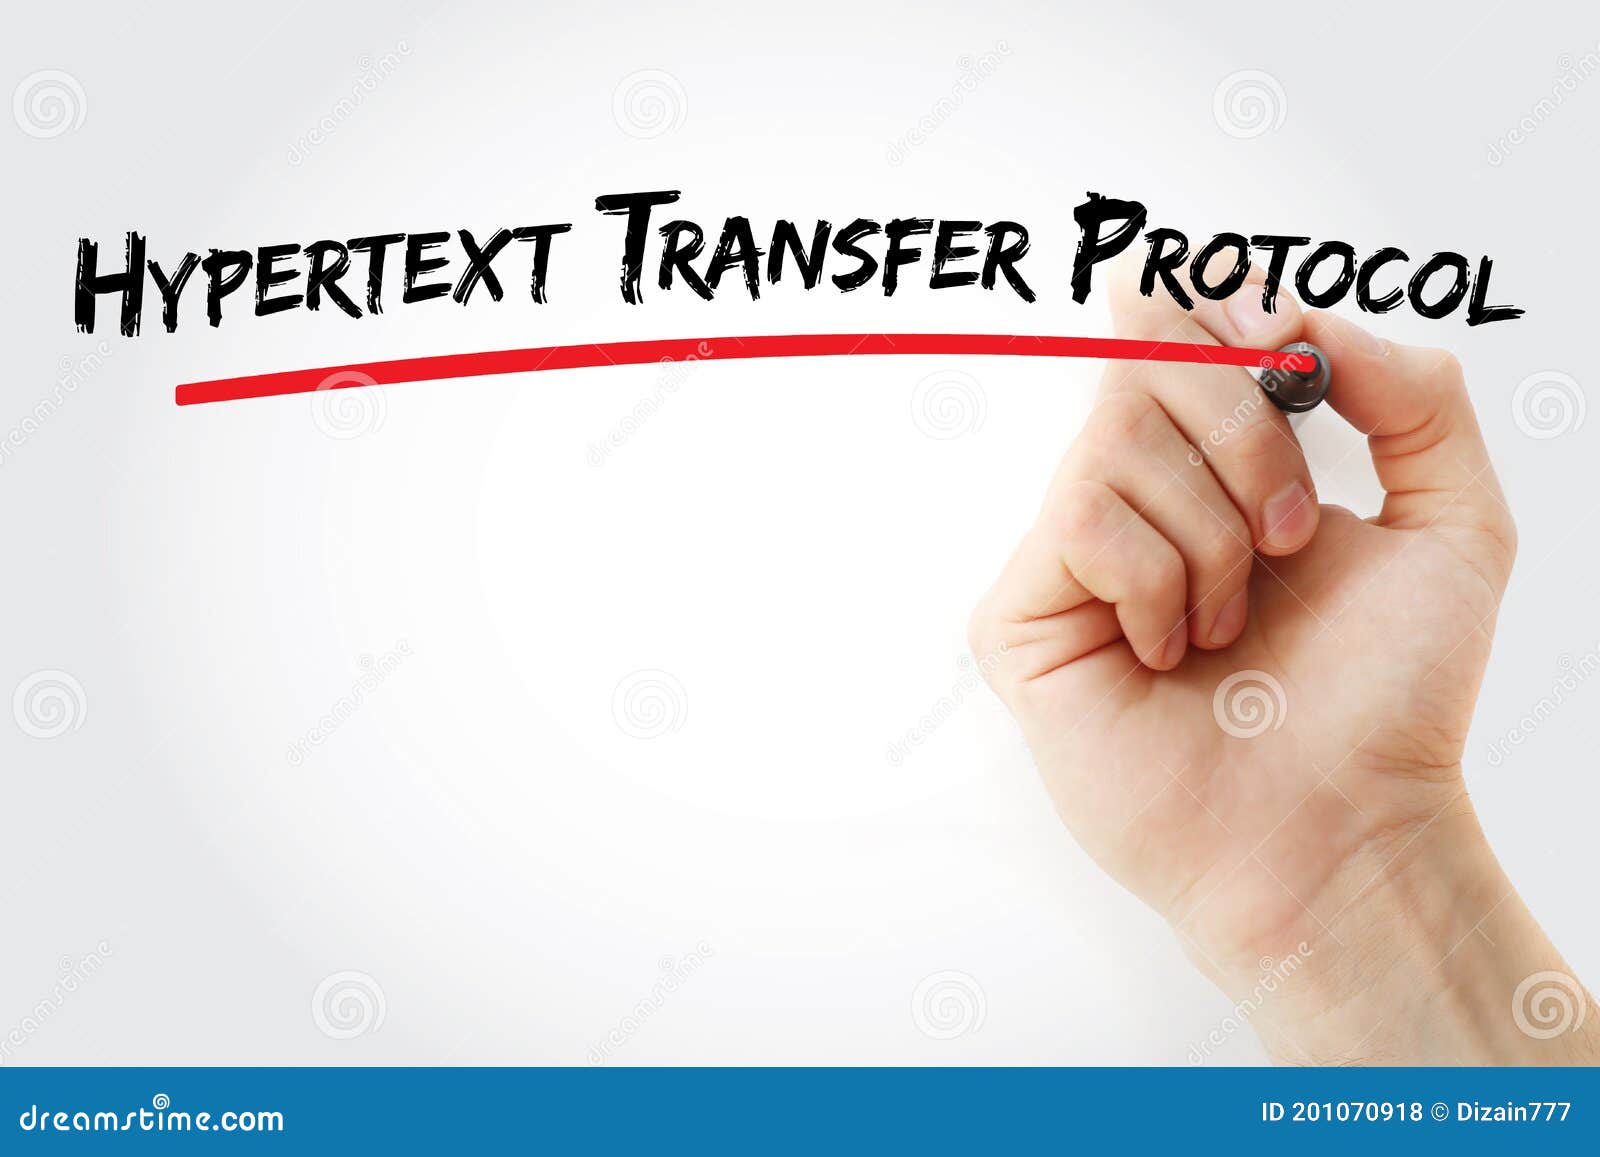 hypertext transfer protocol text with marker